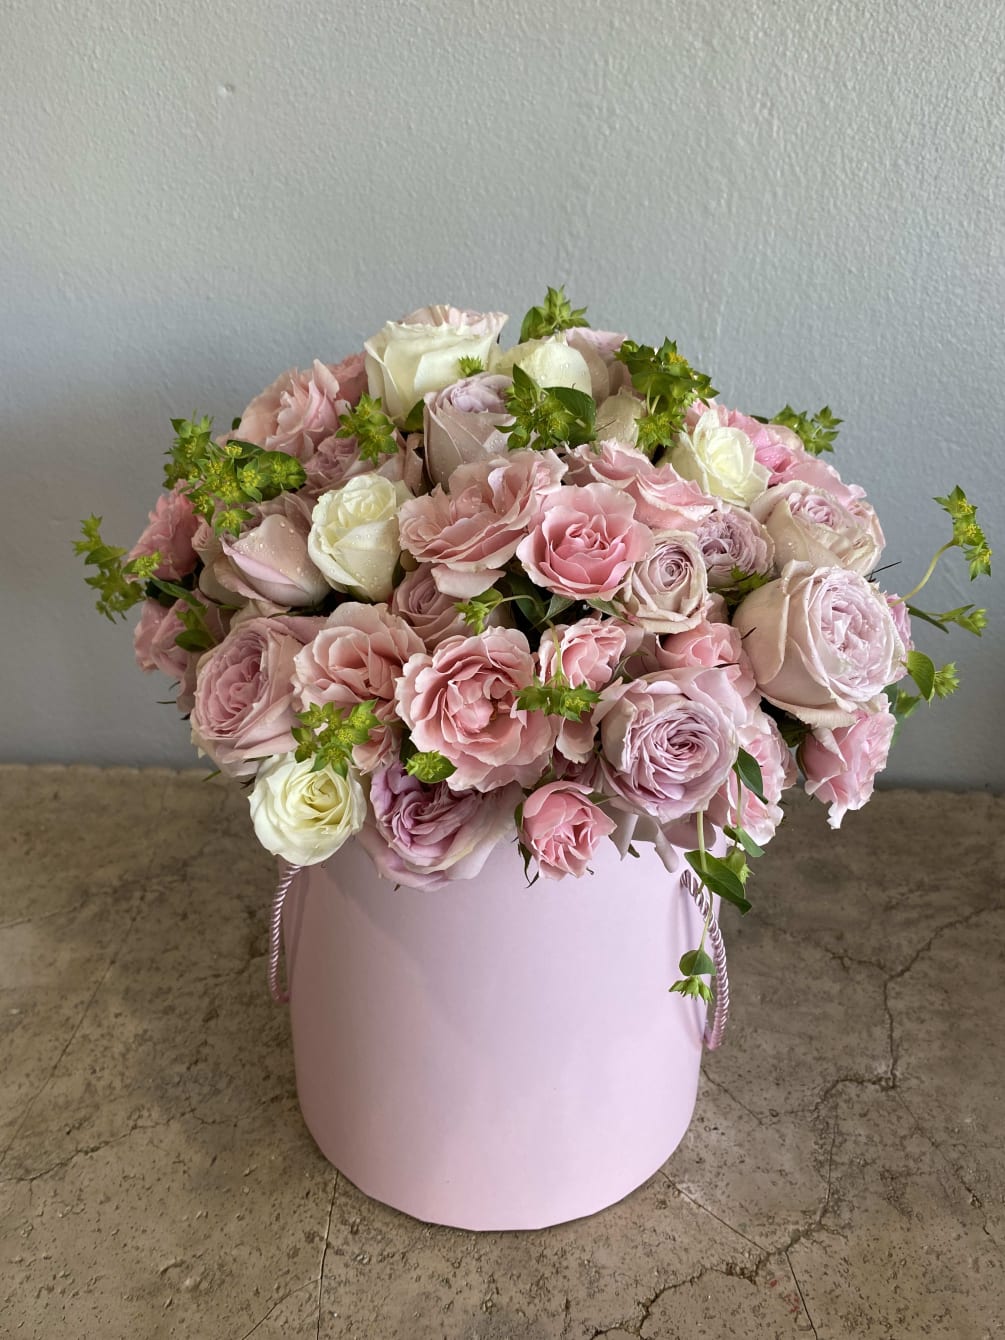 PREMIUM PICTURE. A mound of pink roses and greenery artfully designed in